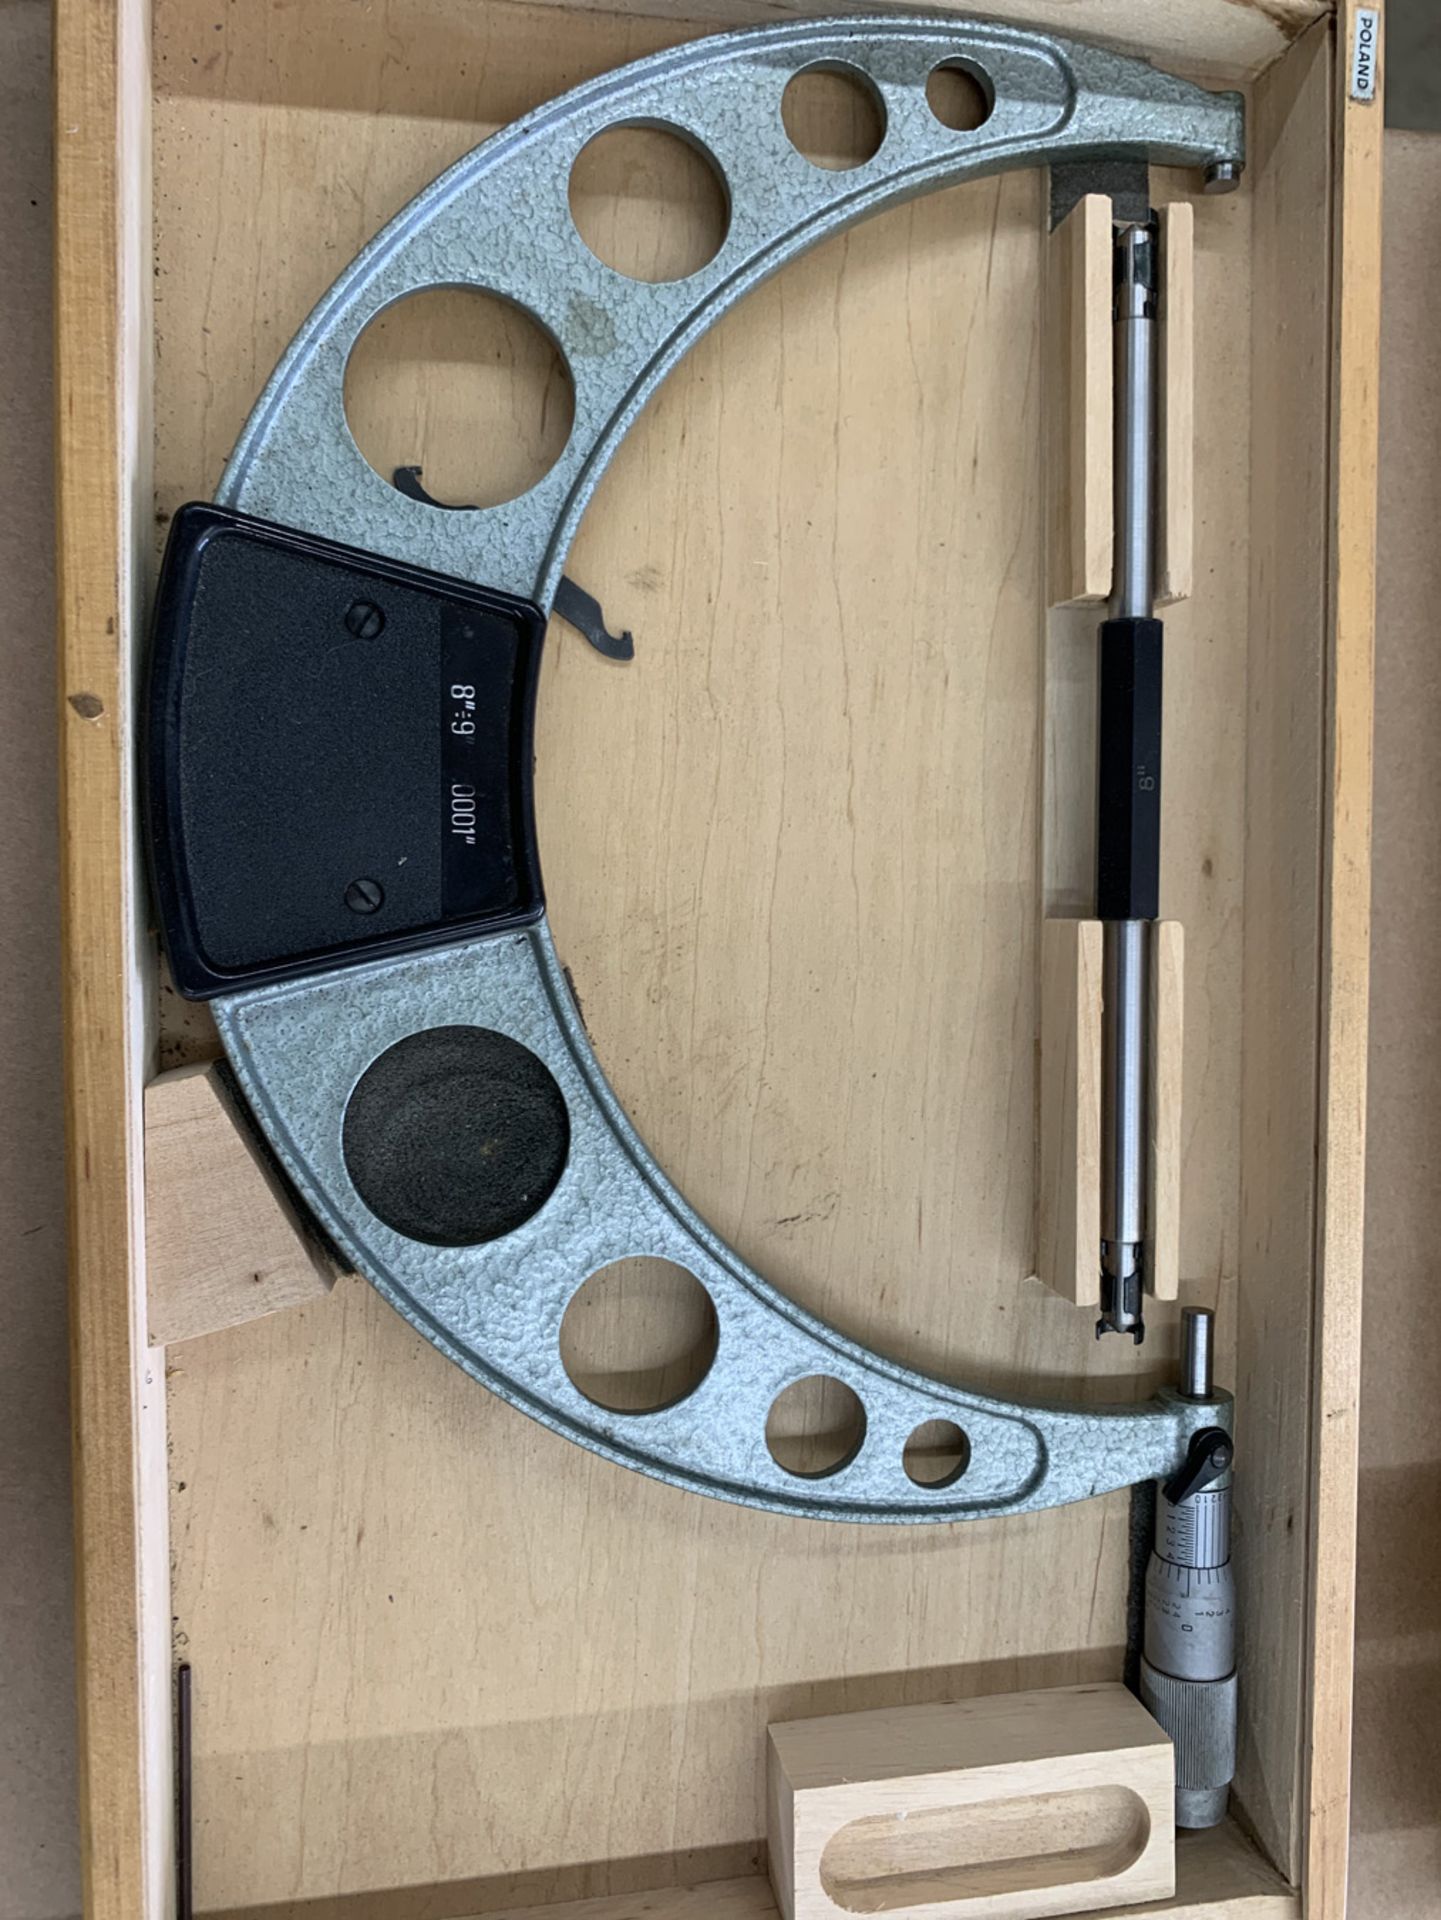 Lot of 3: Mitutoyo O.D. Micrometers - Image 3 of 4